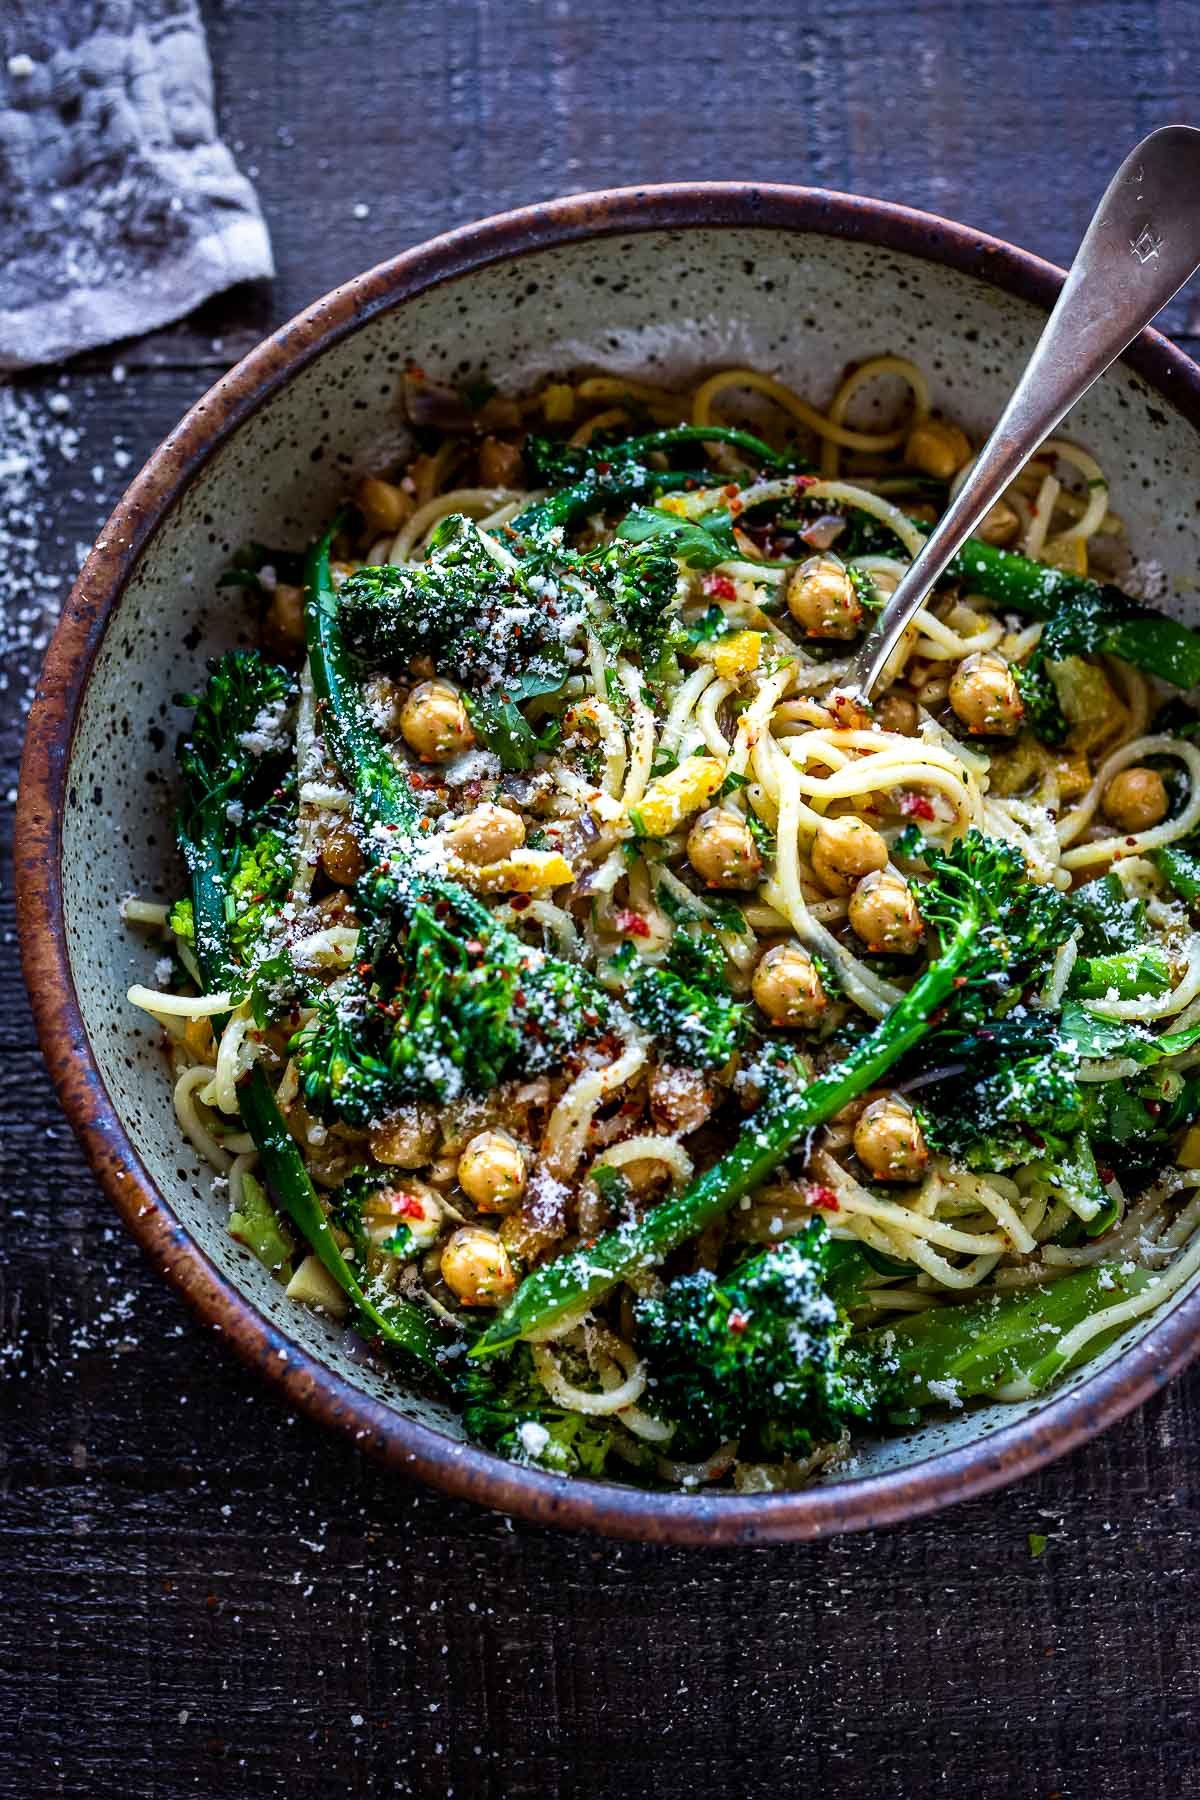 PASTA WITH BROCCOLINI, PRESERVED LEMON AND CHICKPEAS